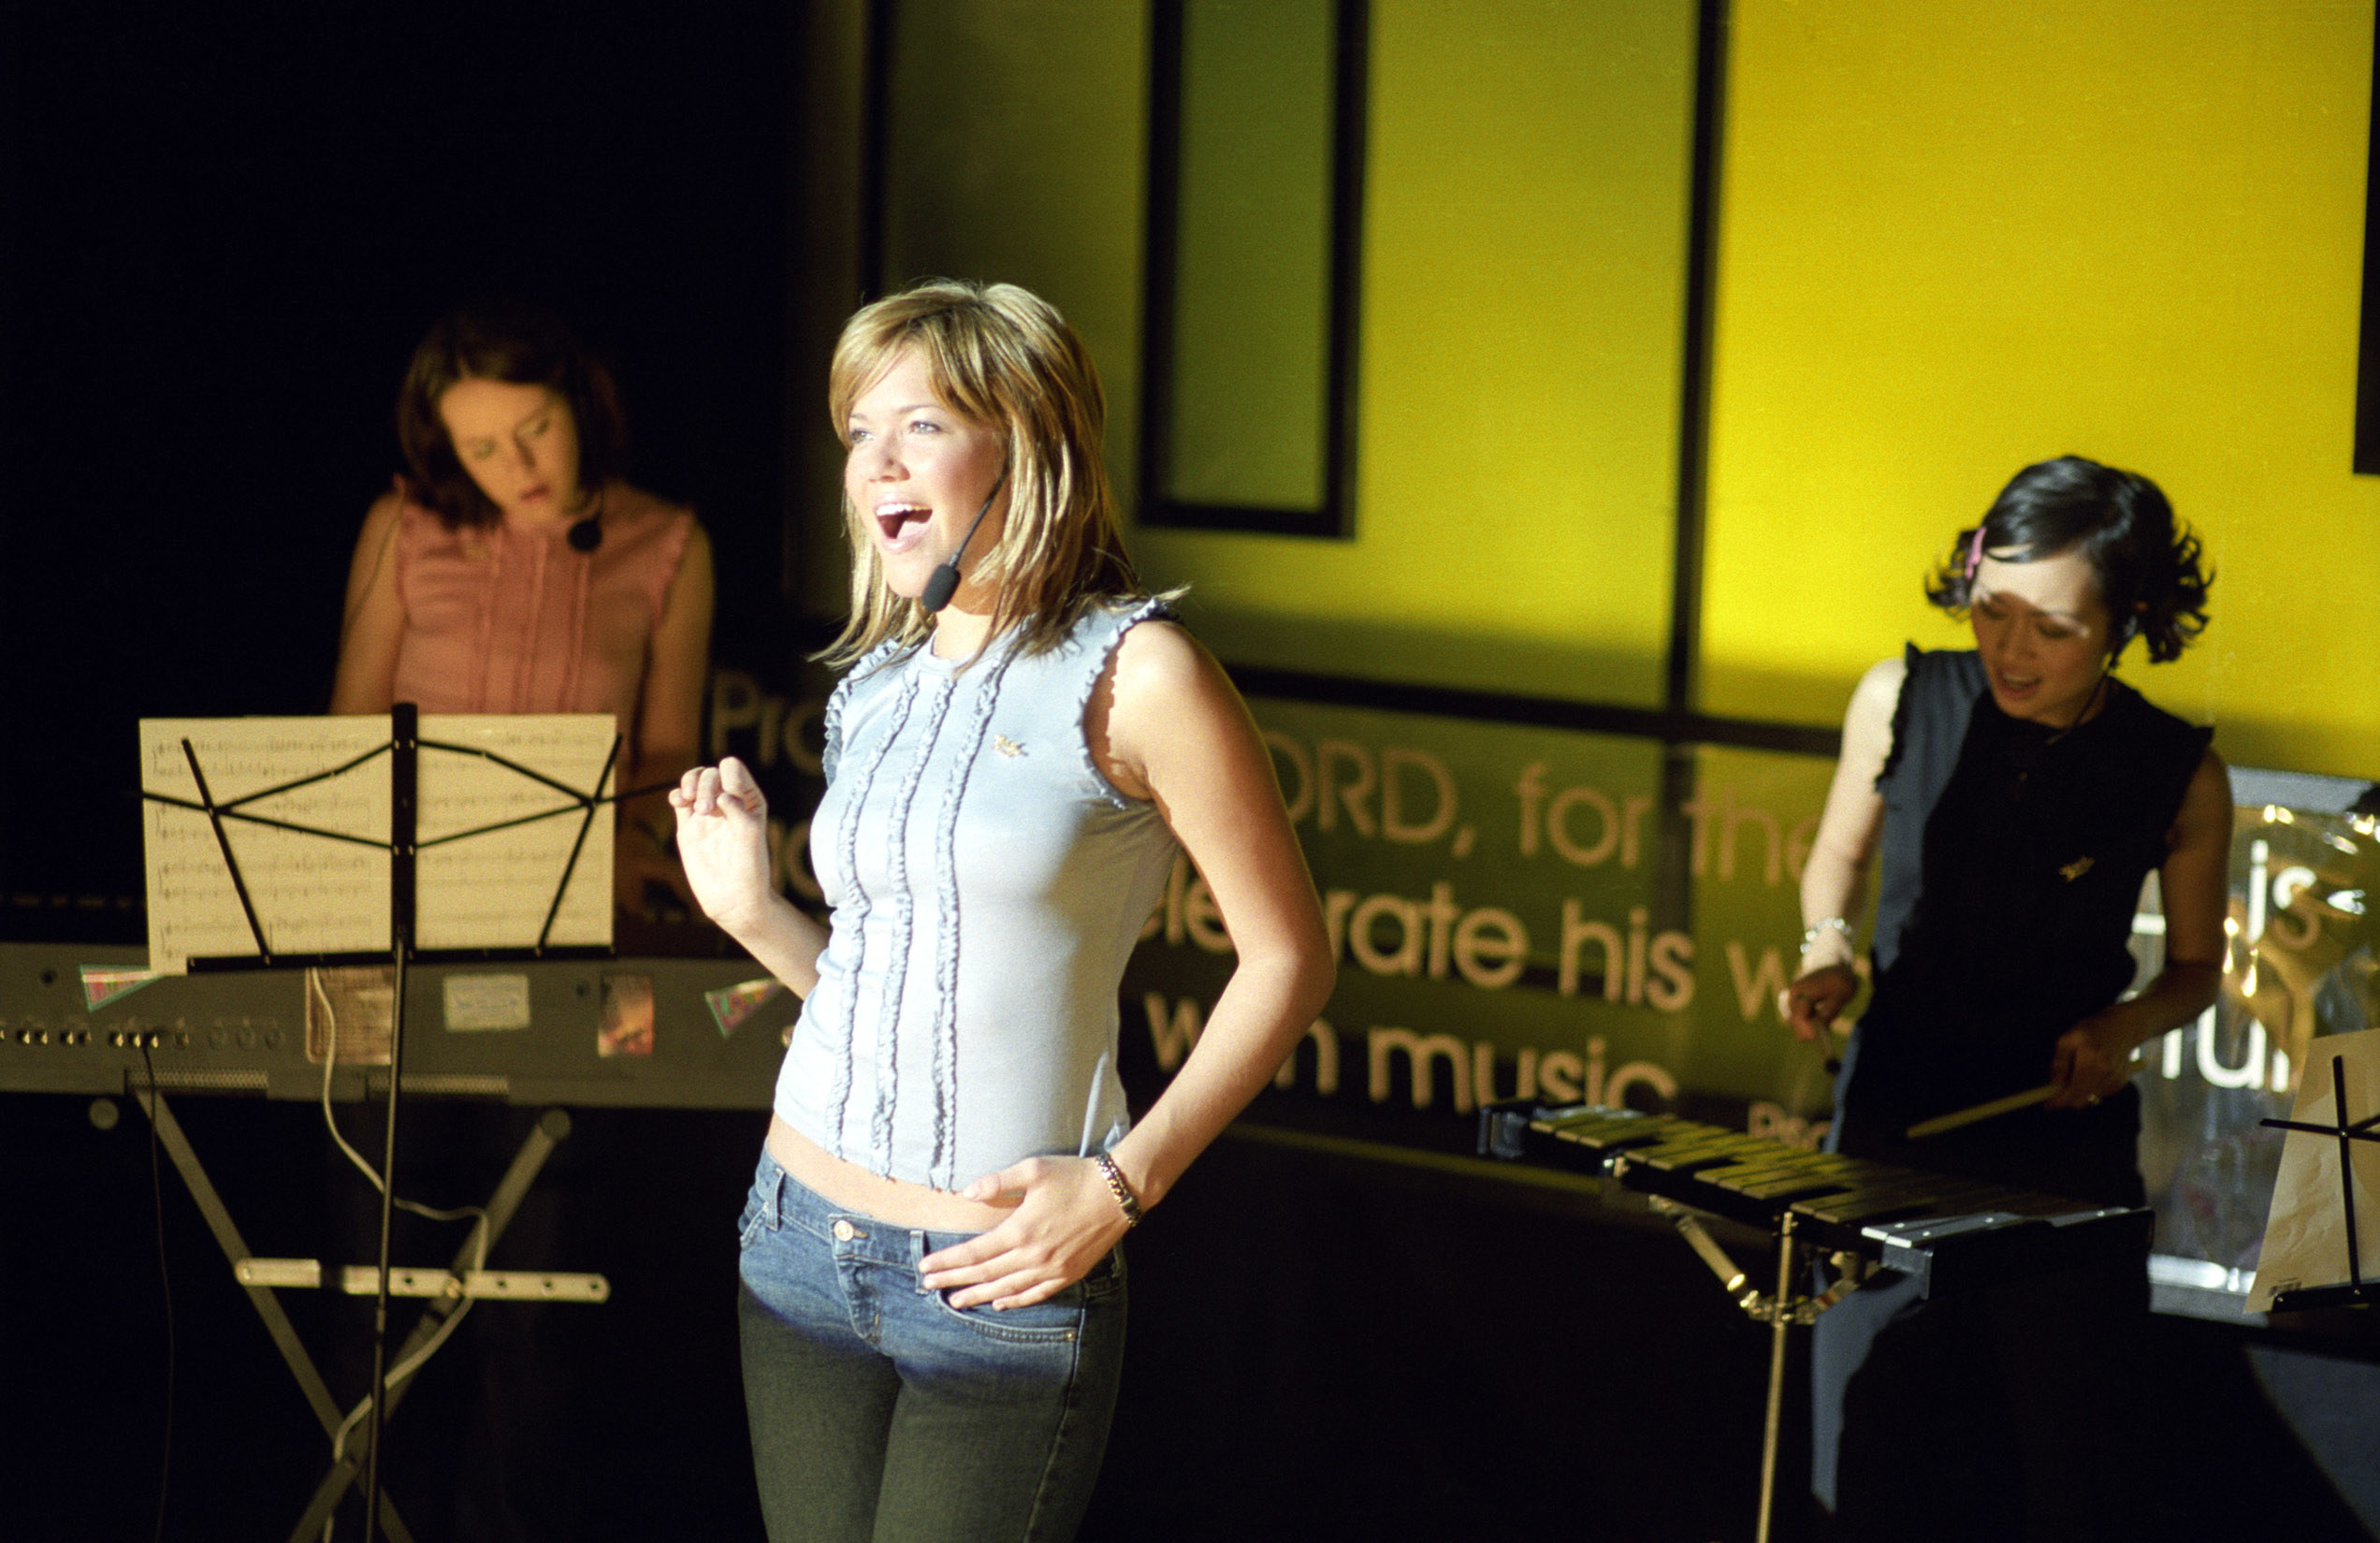 Mandy Moore leads worship at a church with Jena Malone and Elizabeth Thai on instruments